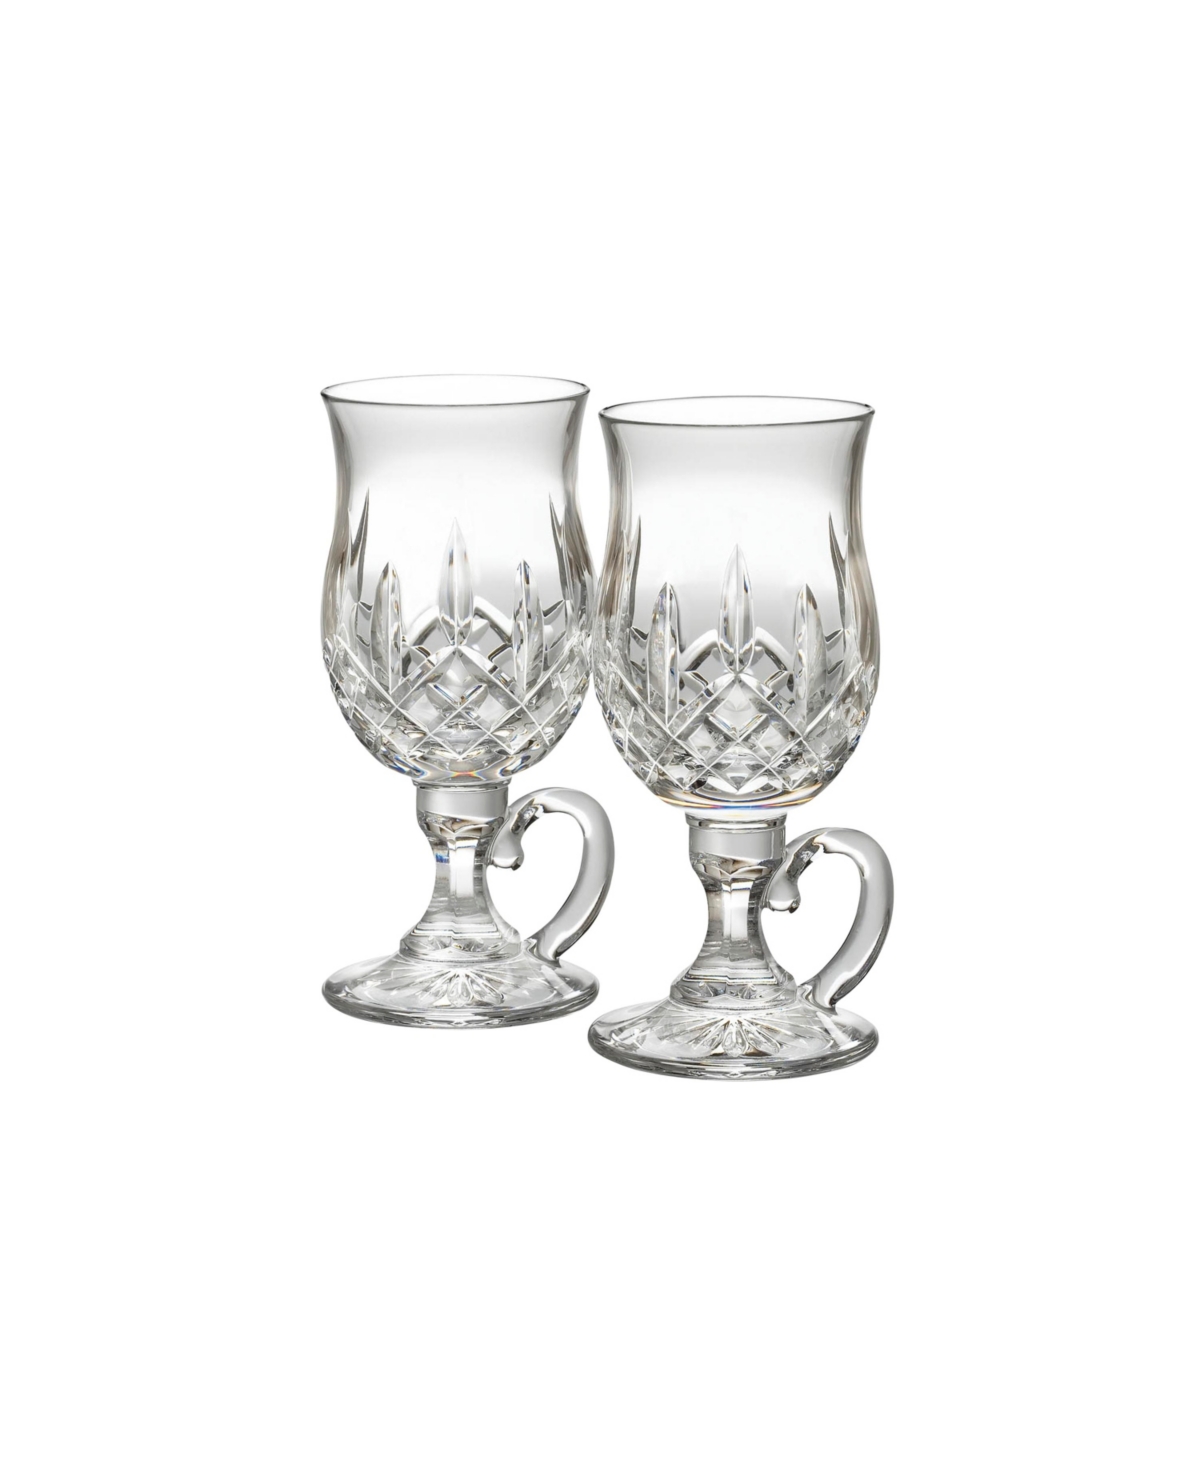 Waterford Lismore Irish Coffee Set, 2 Pieces, 8 oz In Clear